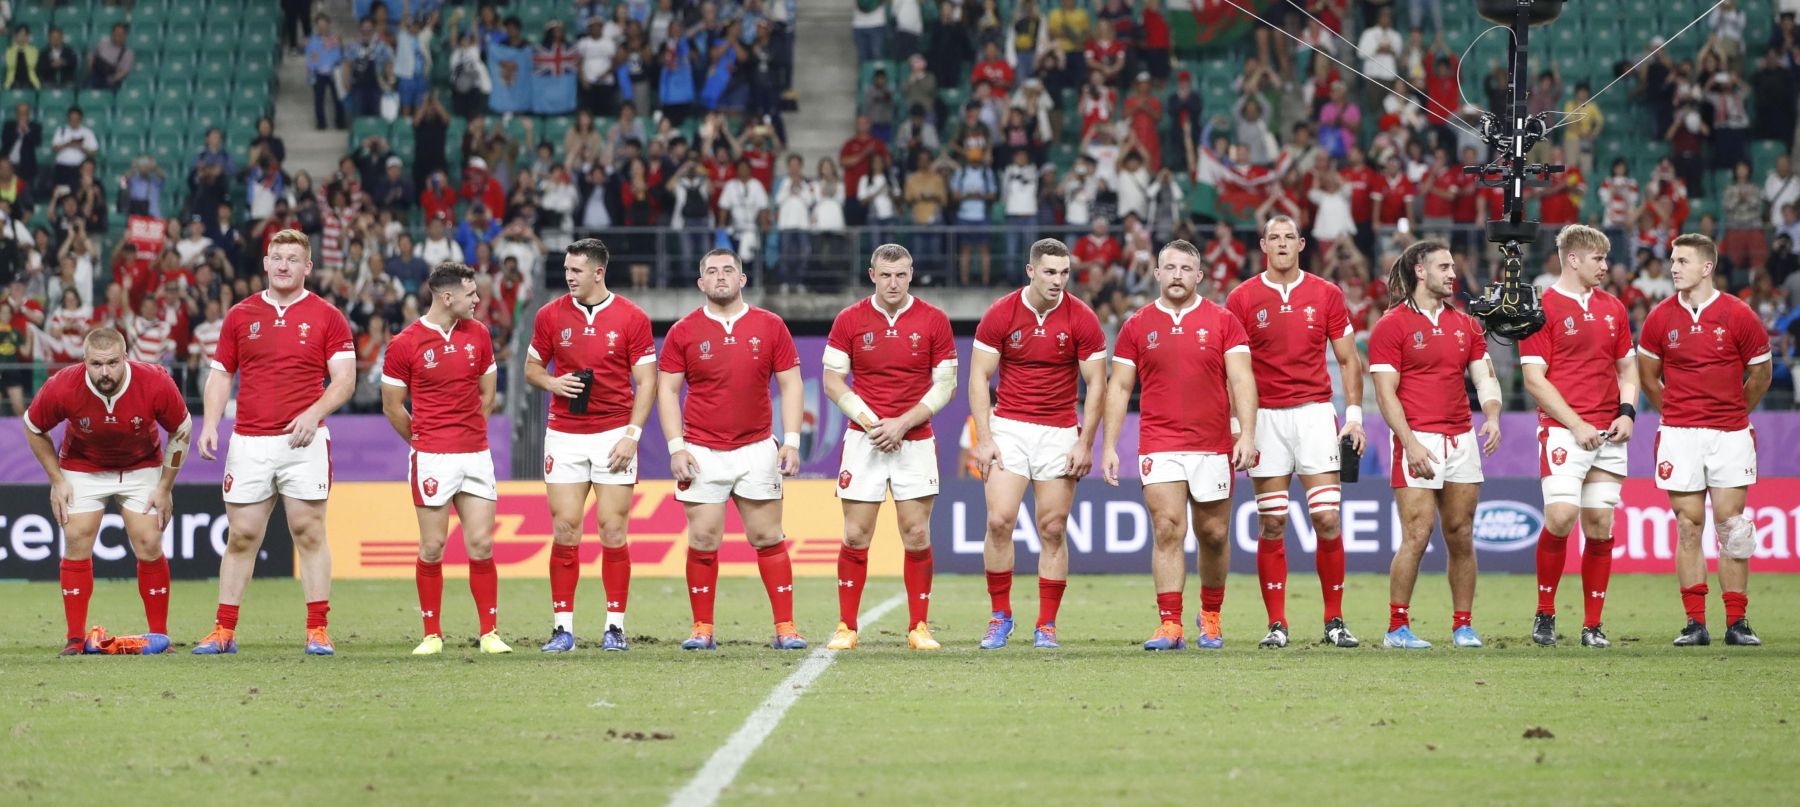 Rugby World Cup 2019 in Japan Wales Team 002